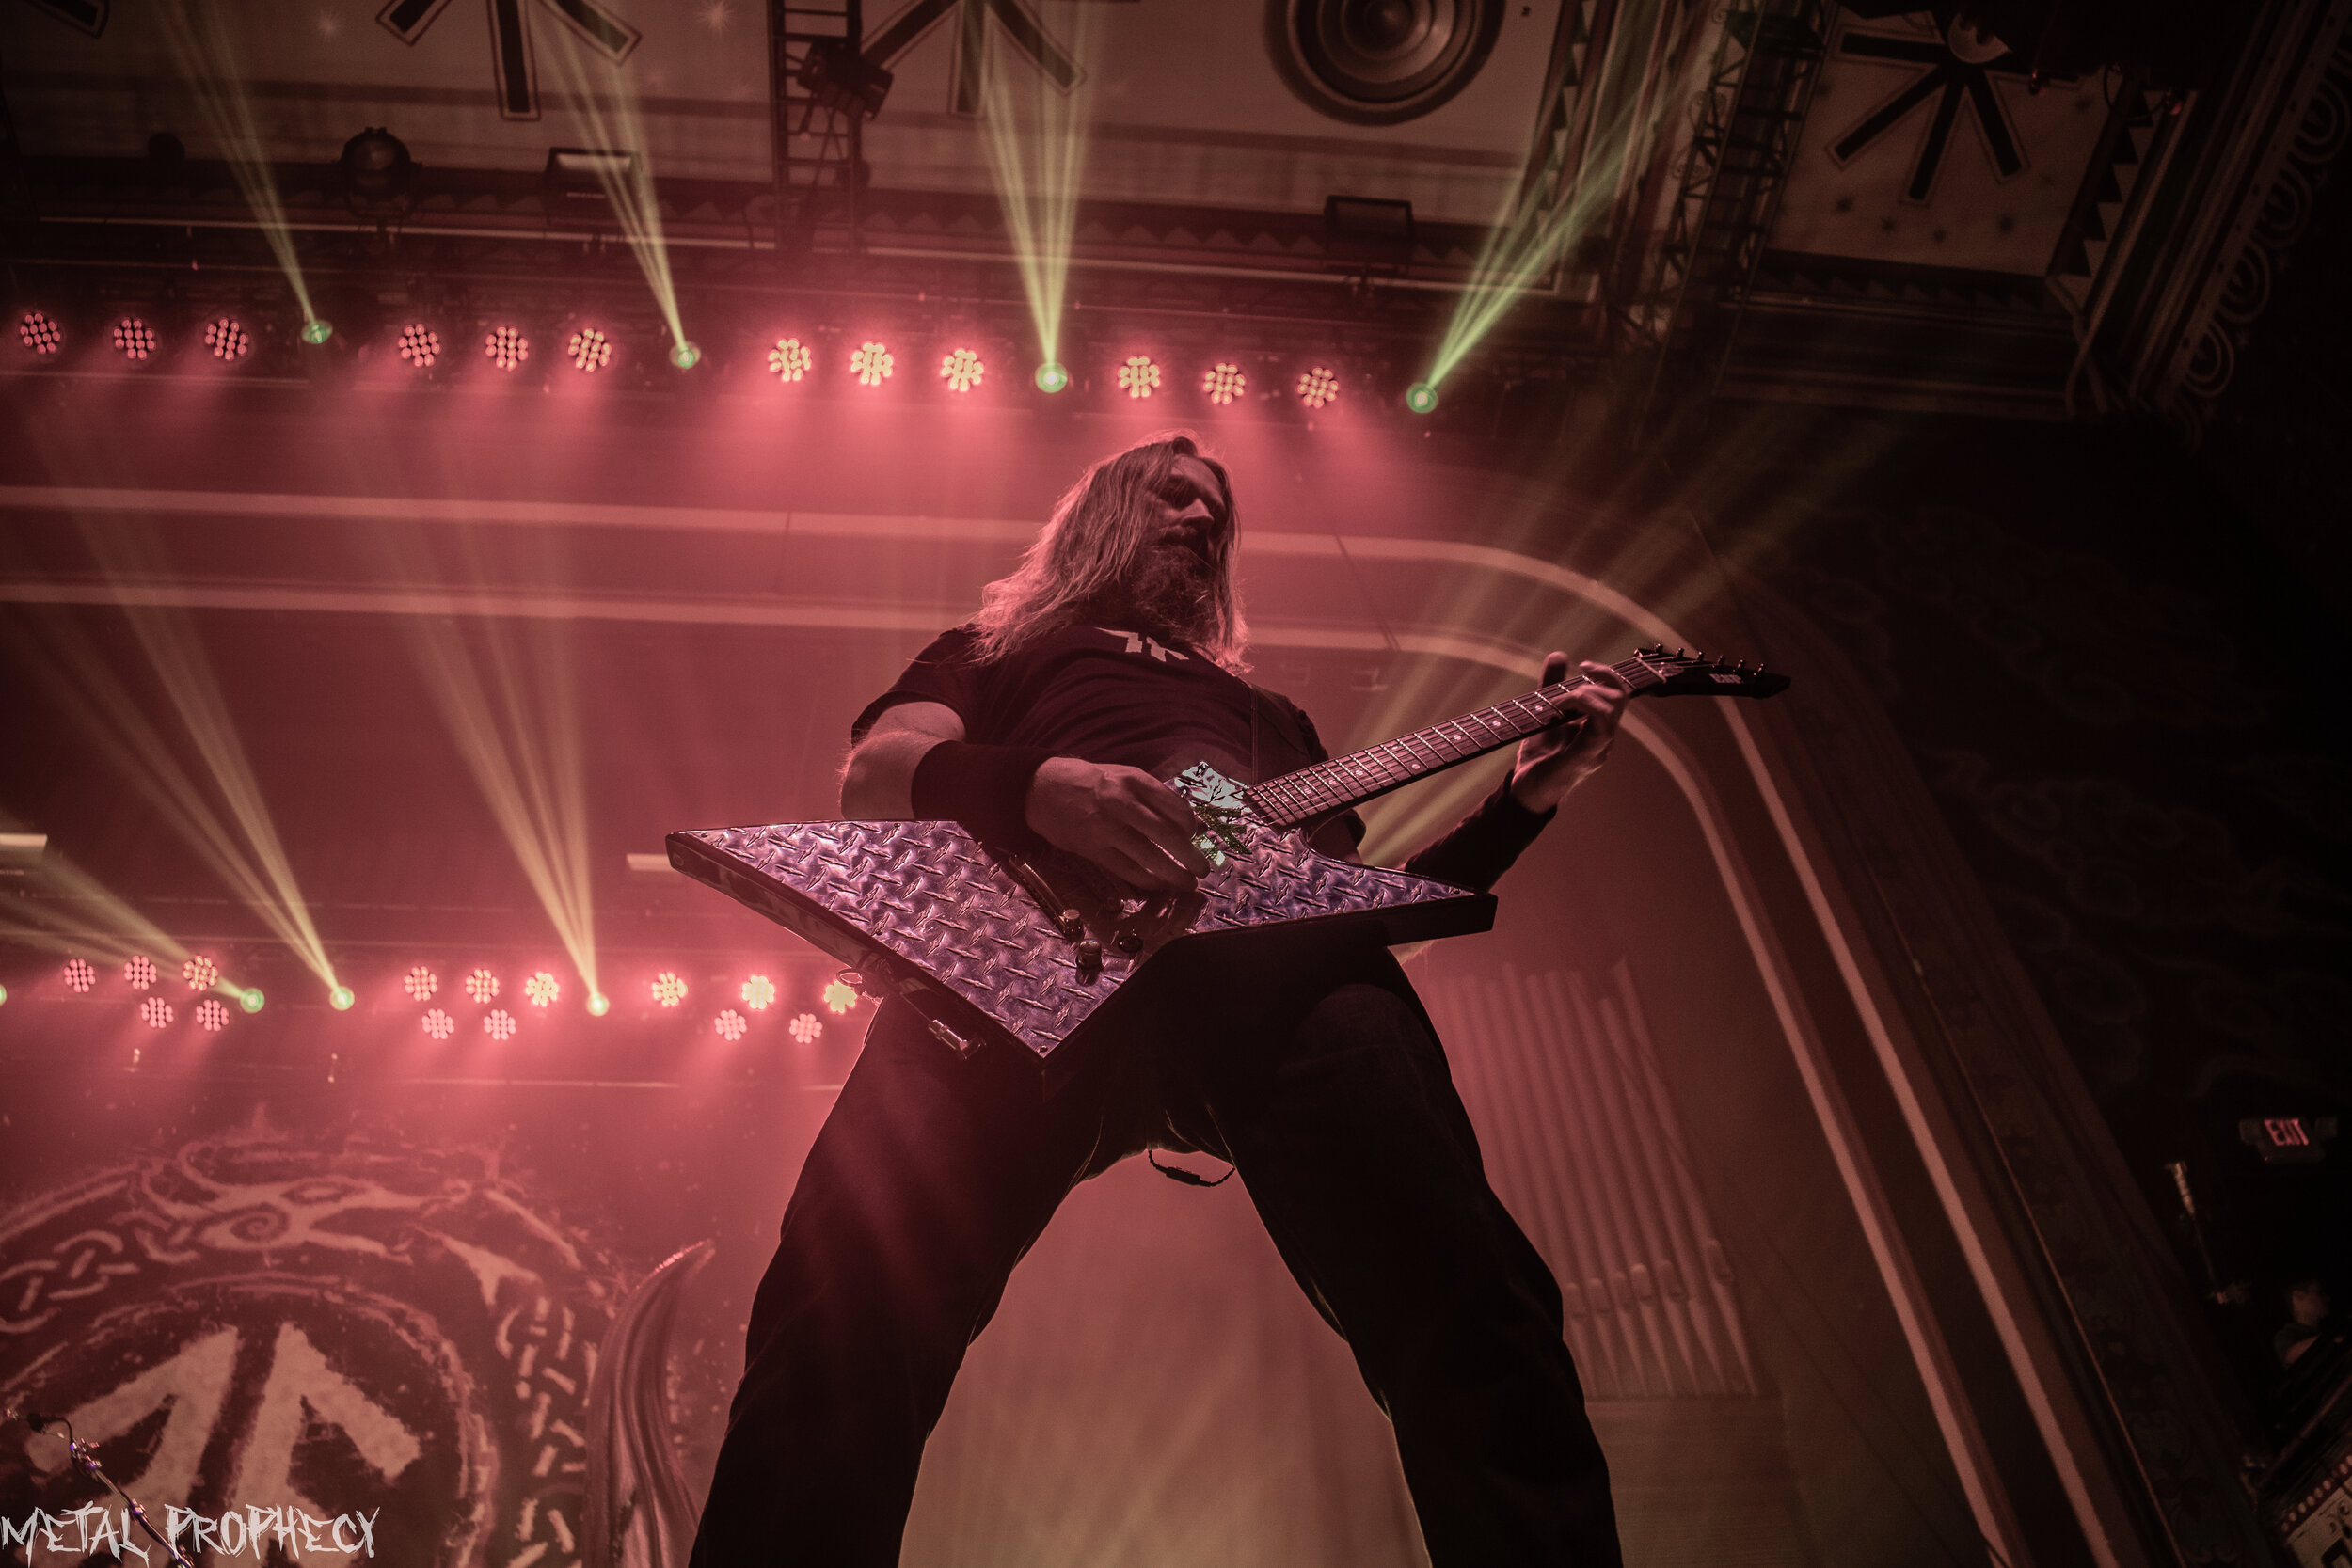 Amon Amarth at The Tabernacle